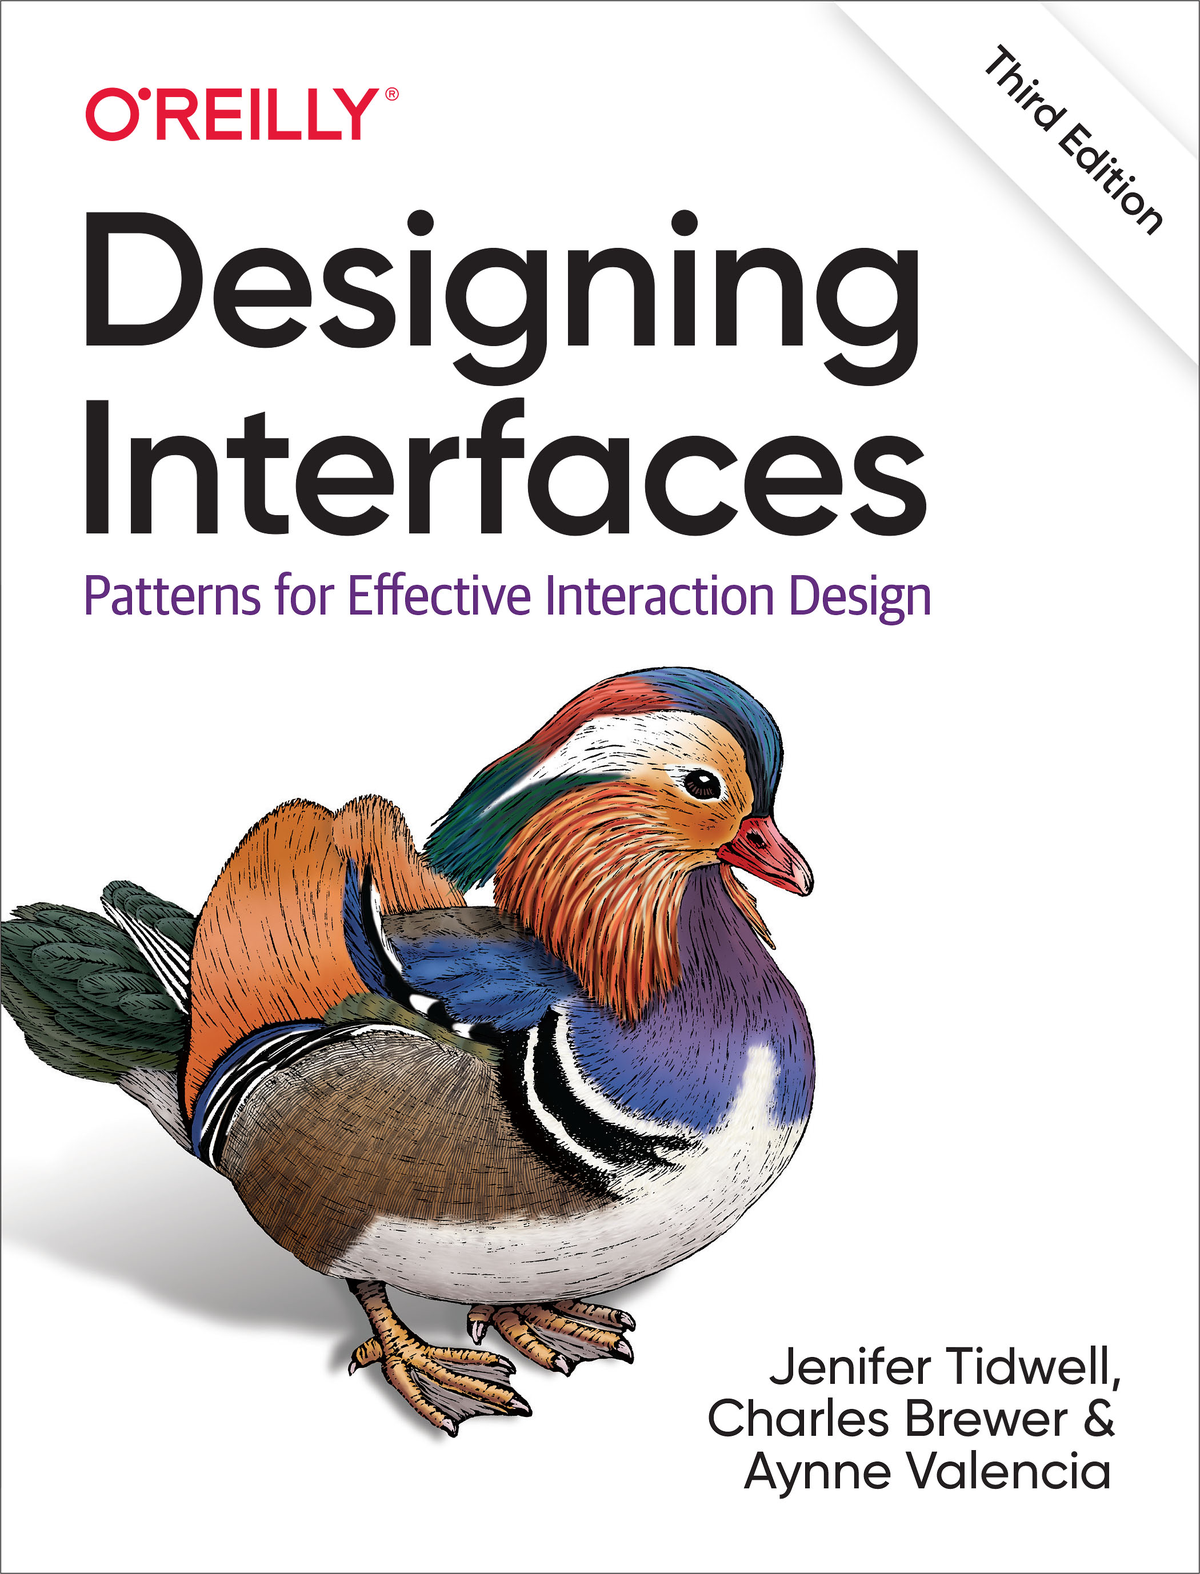 Designing Interfaces by Jenifer Tidwell Charles Brewer and Aynne Valencia - photo 1